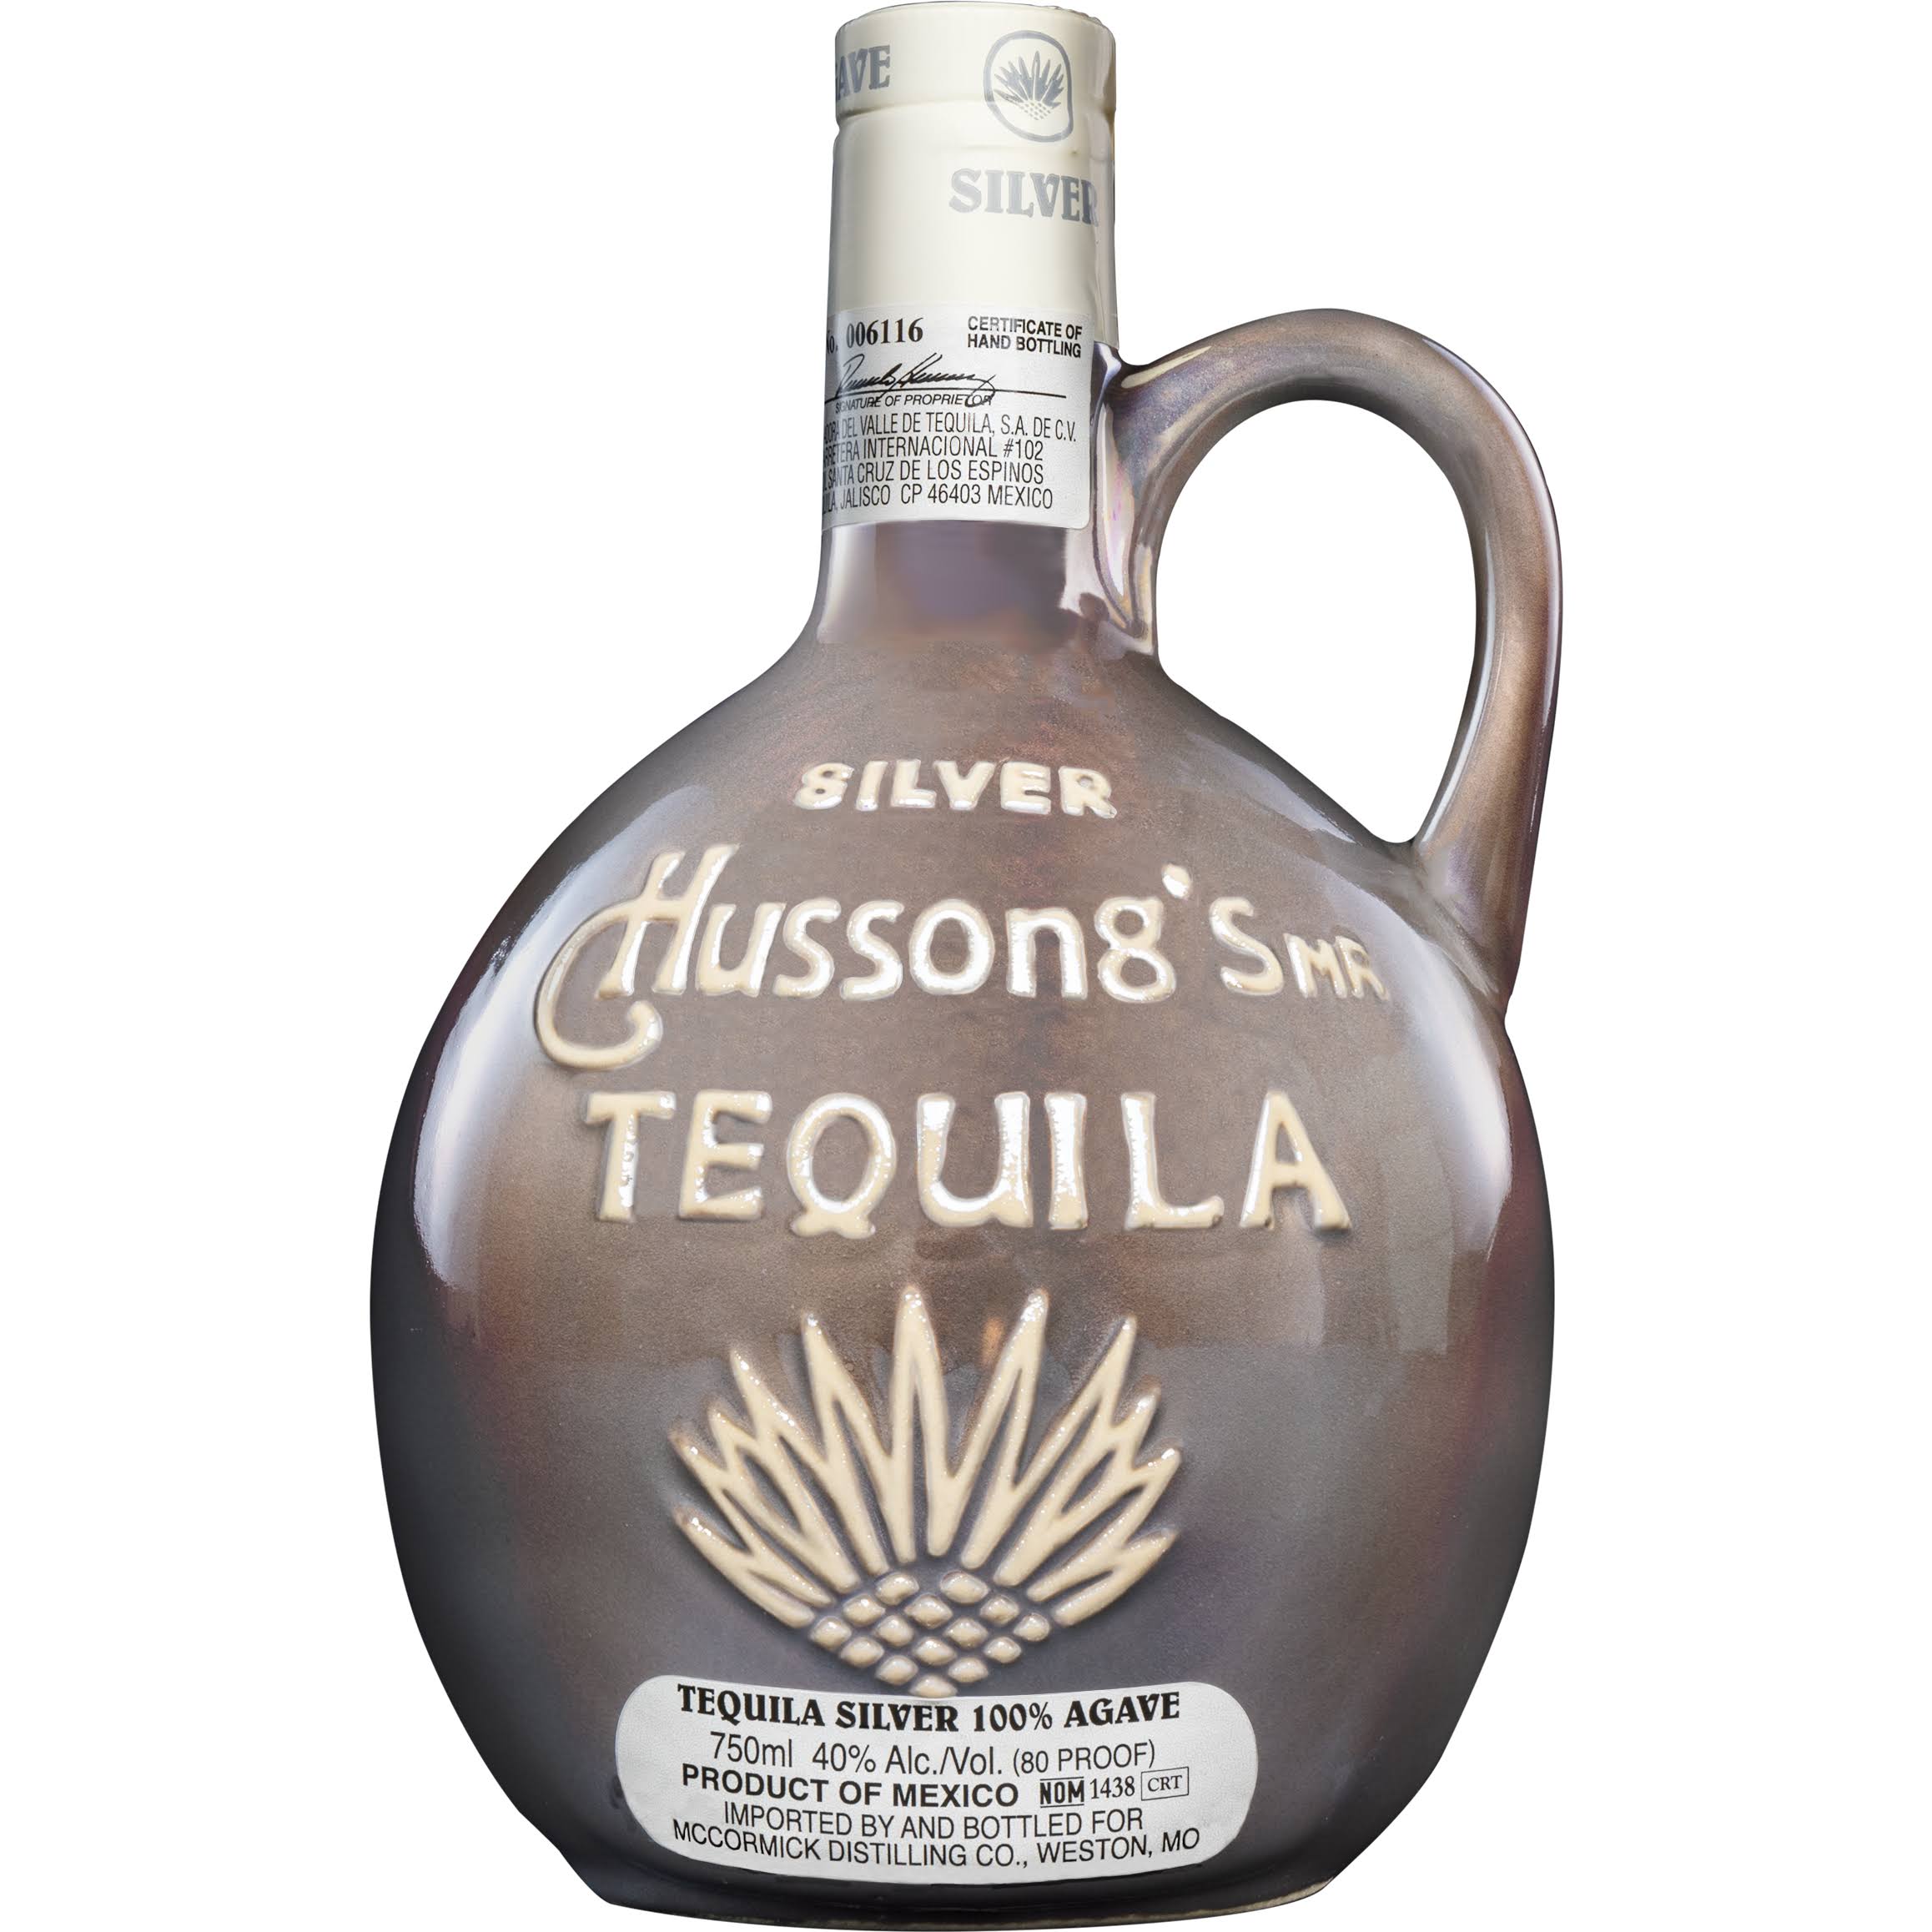 Hussong's Silver Tequila (750ml)